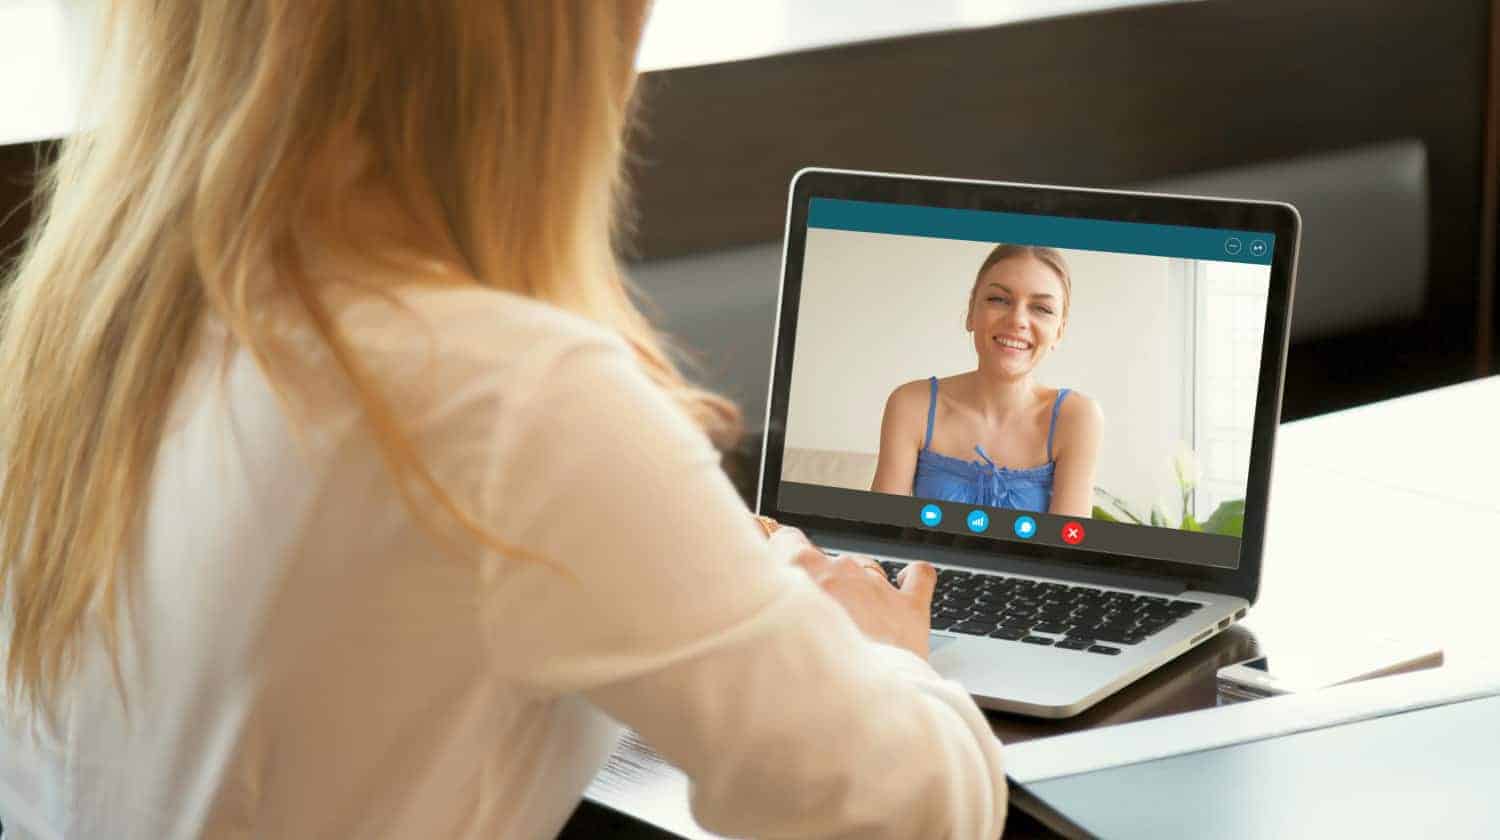 two young women chatting online by how to video chat